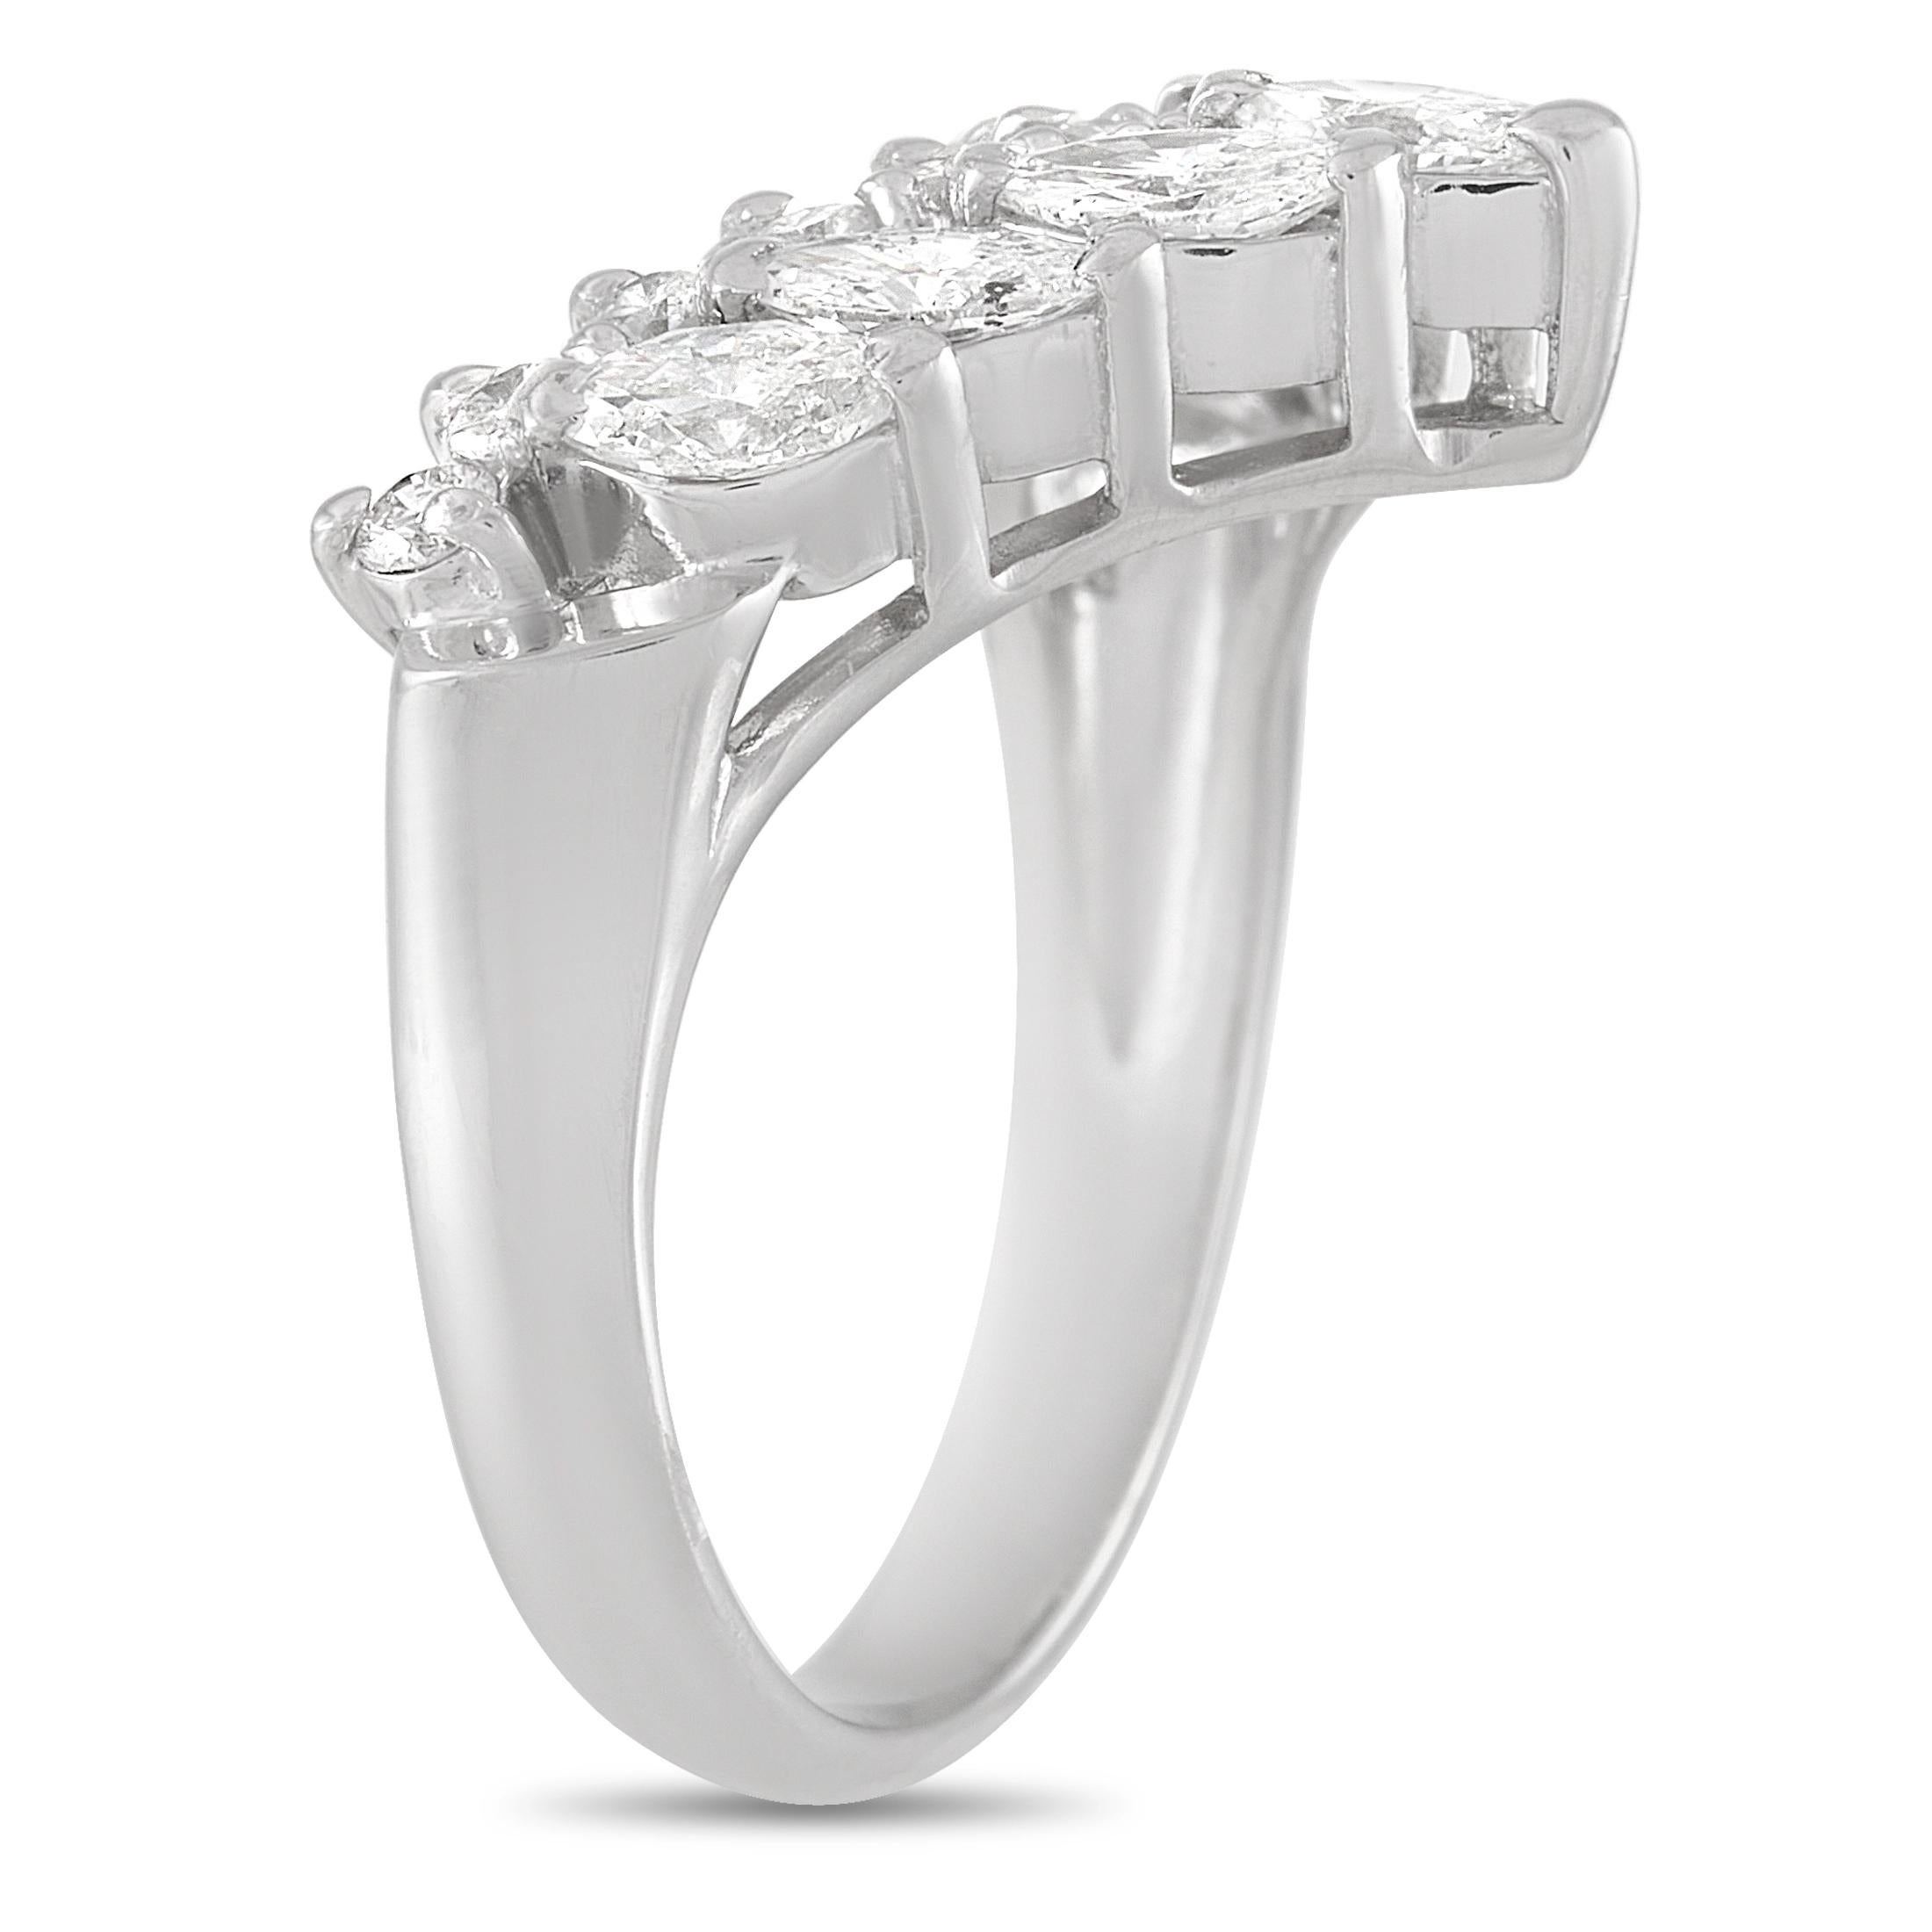 Displaying a sleek profile, the LB Exclusive V-Shaped Platinum 1.20 carat Diamond Ring steals the show with its understated elegance. The V-shaped split shank crafted in platinum is adorned with prong-set diamonds that glisten so delicately. The